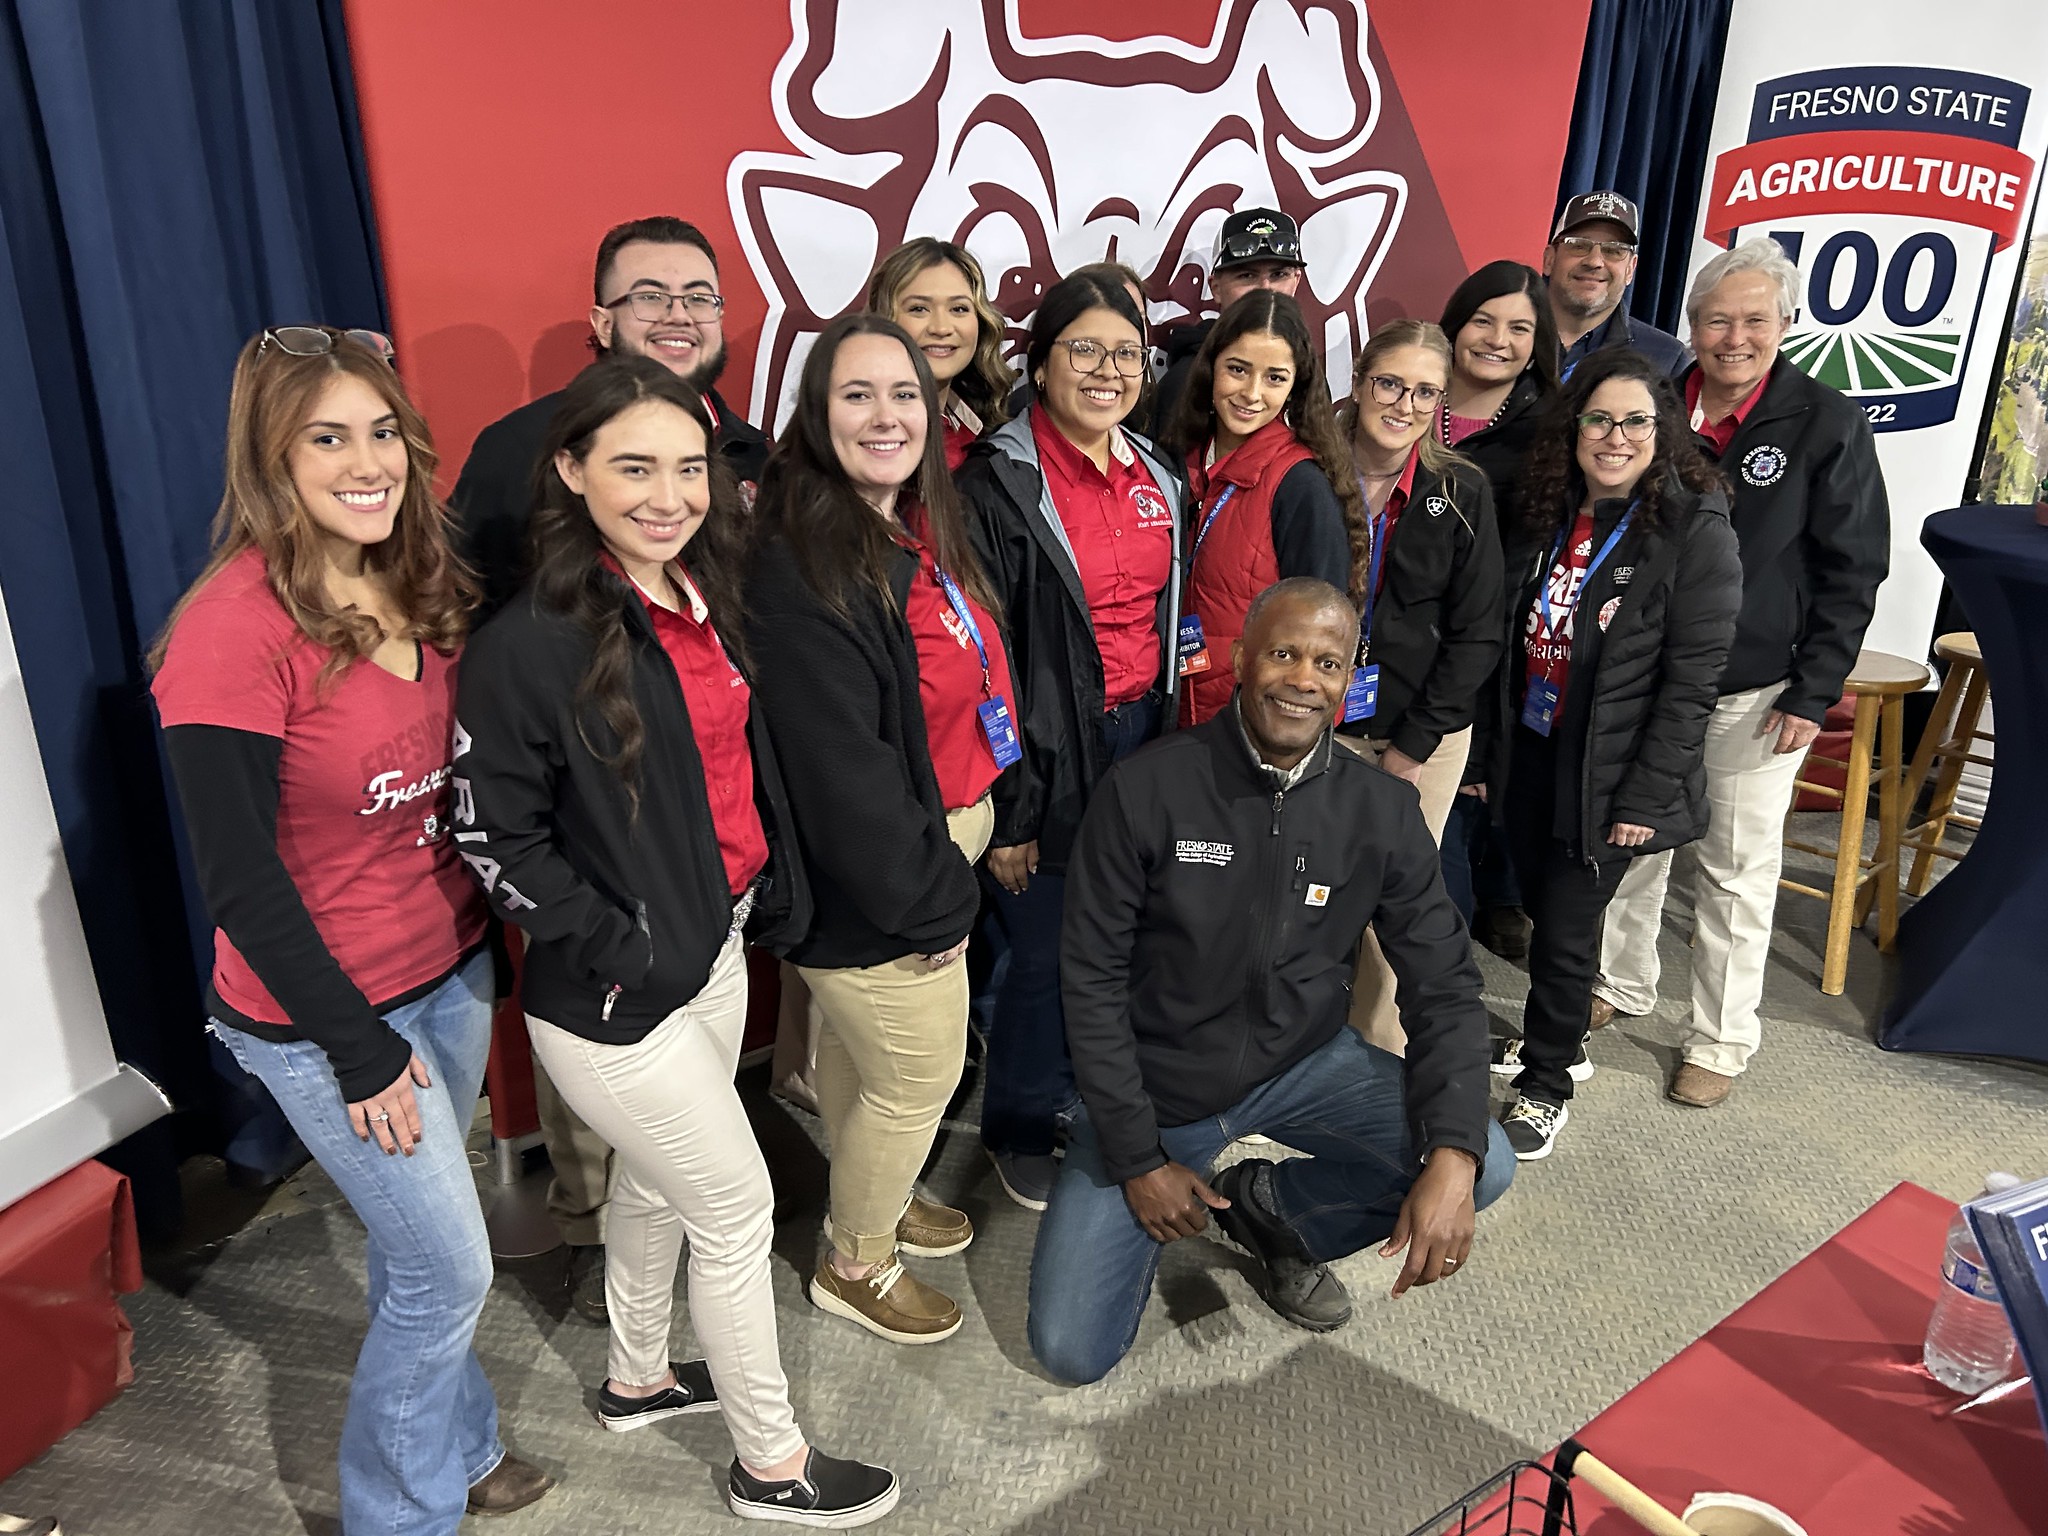 Fresno State Jordan College Dean and the Ag Ambassador students share insights into innovation at the annual World Ag Expo information booth.